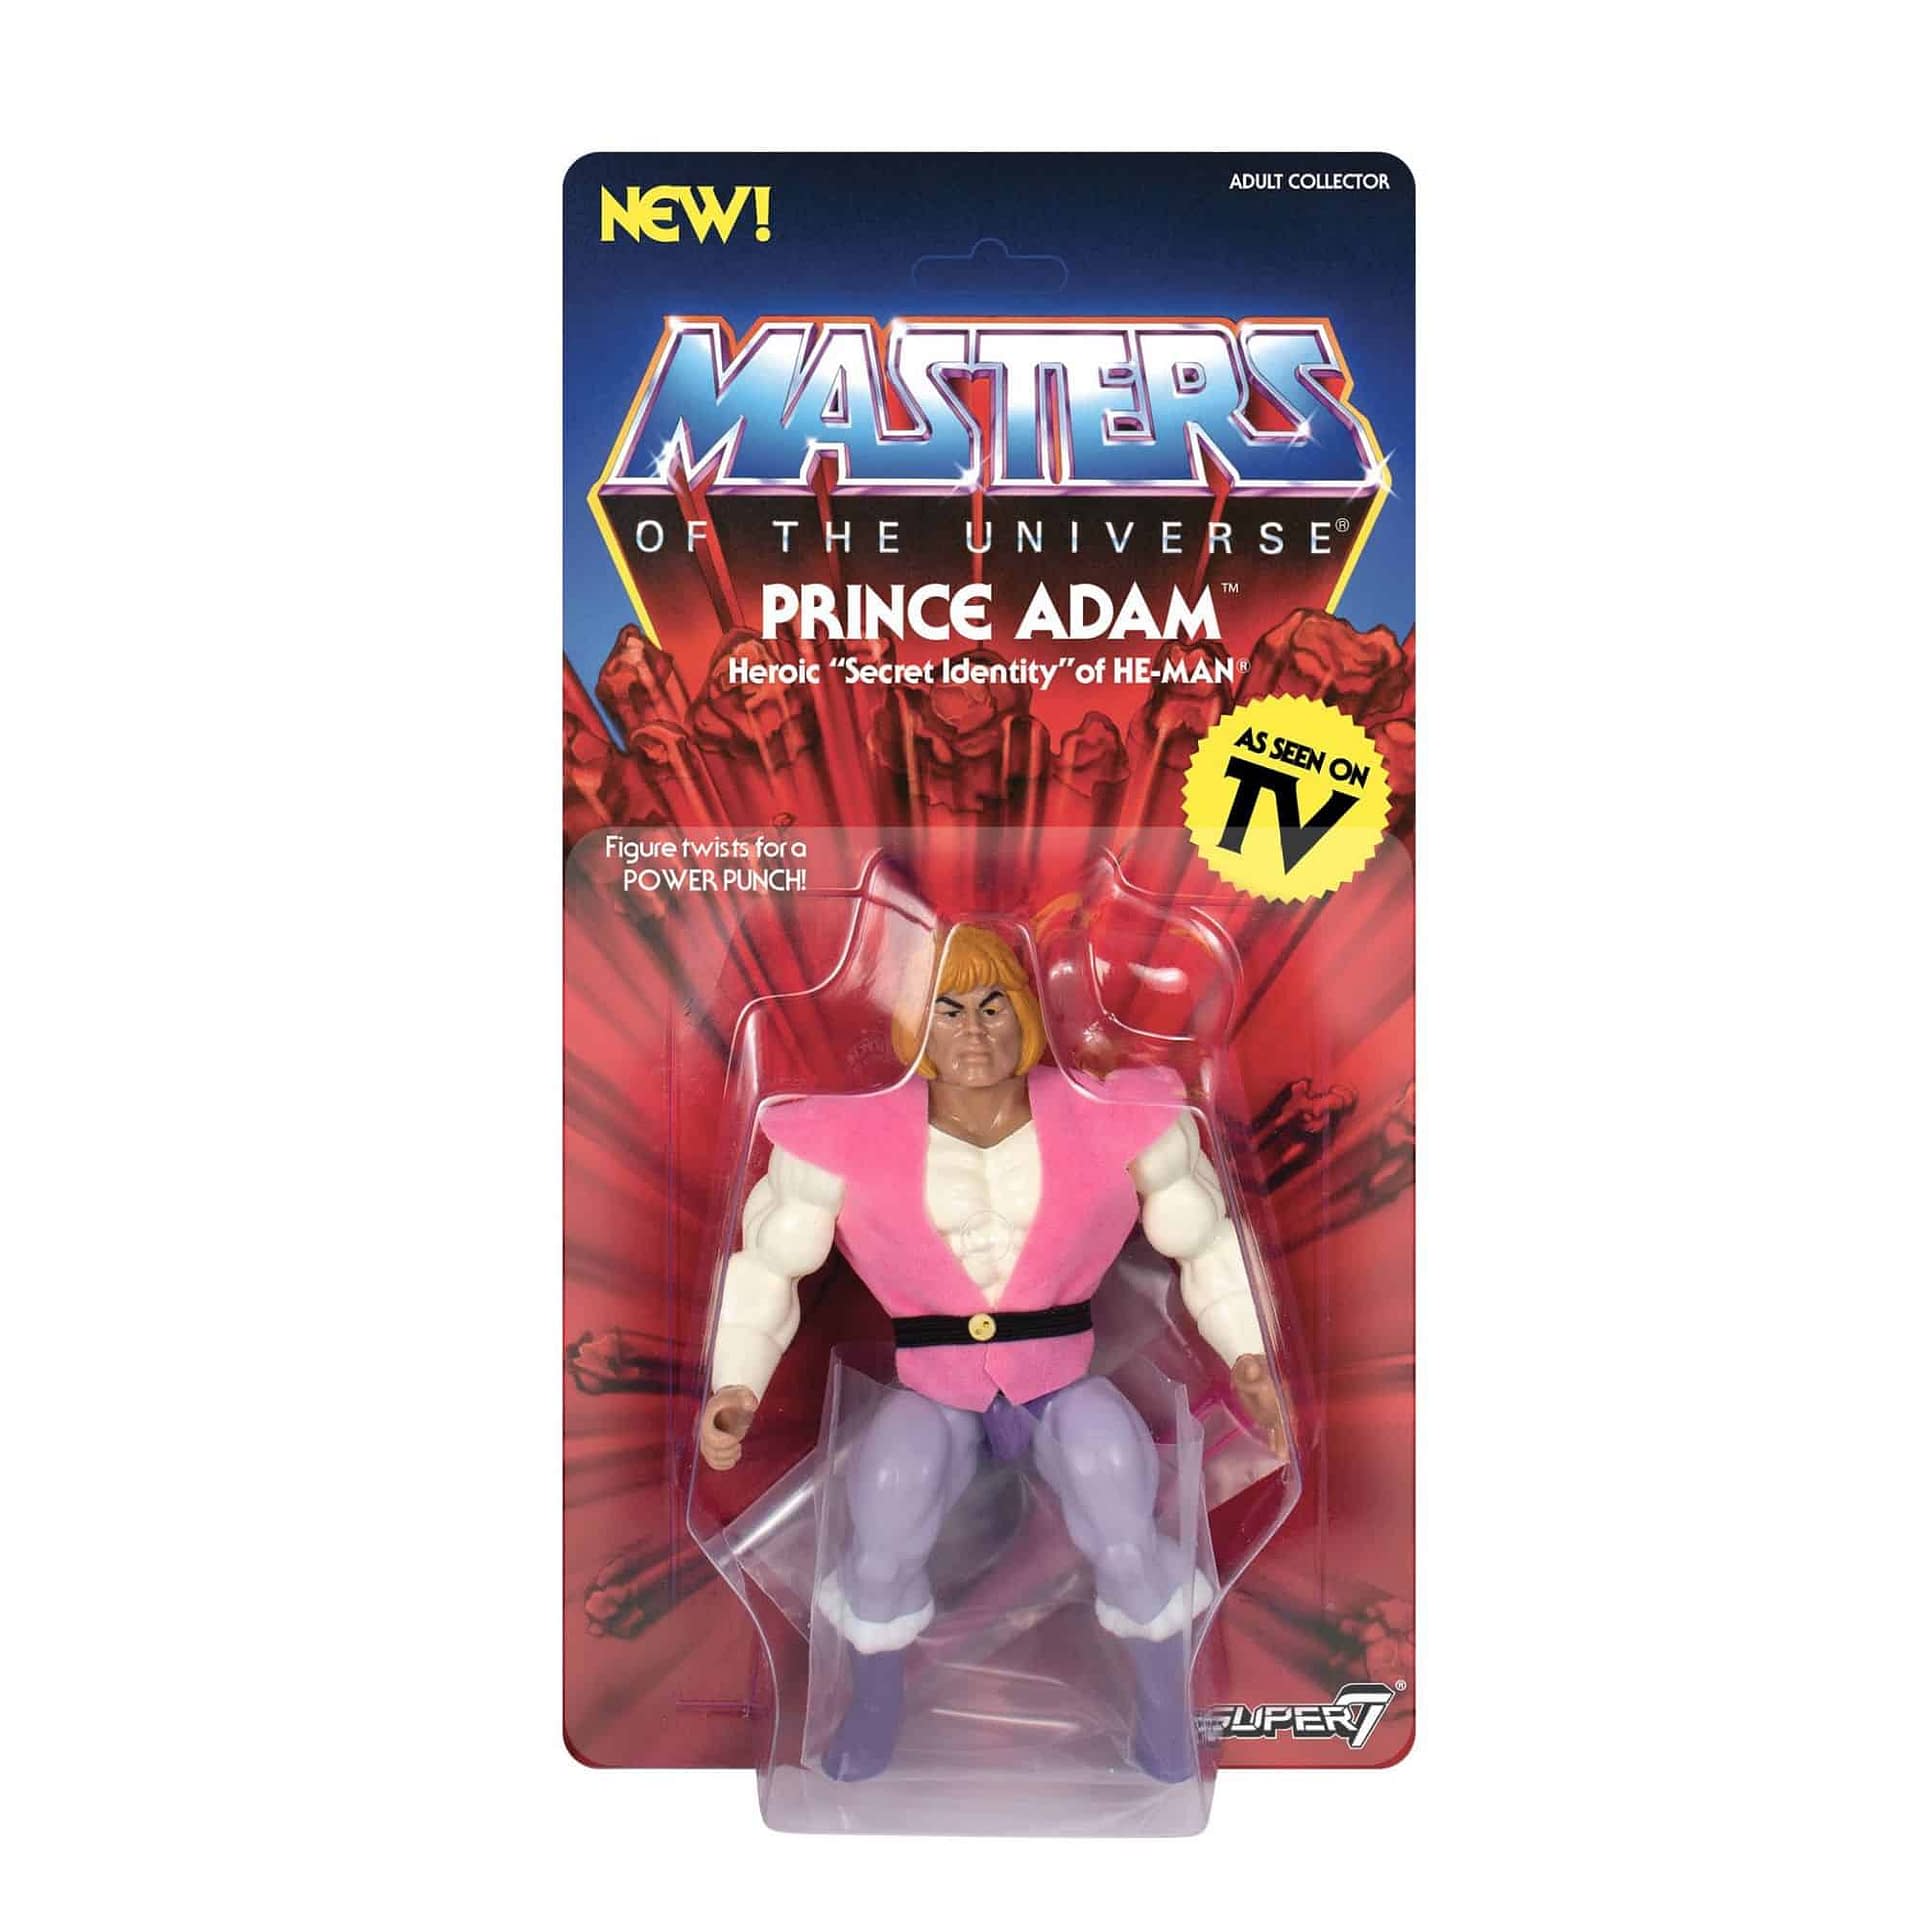 Masters of the Universe Vintage Prince Adam